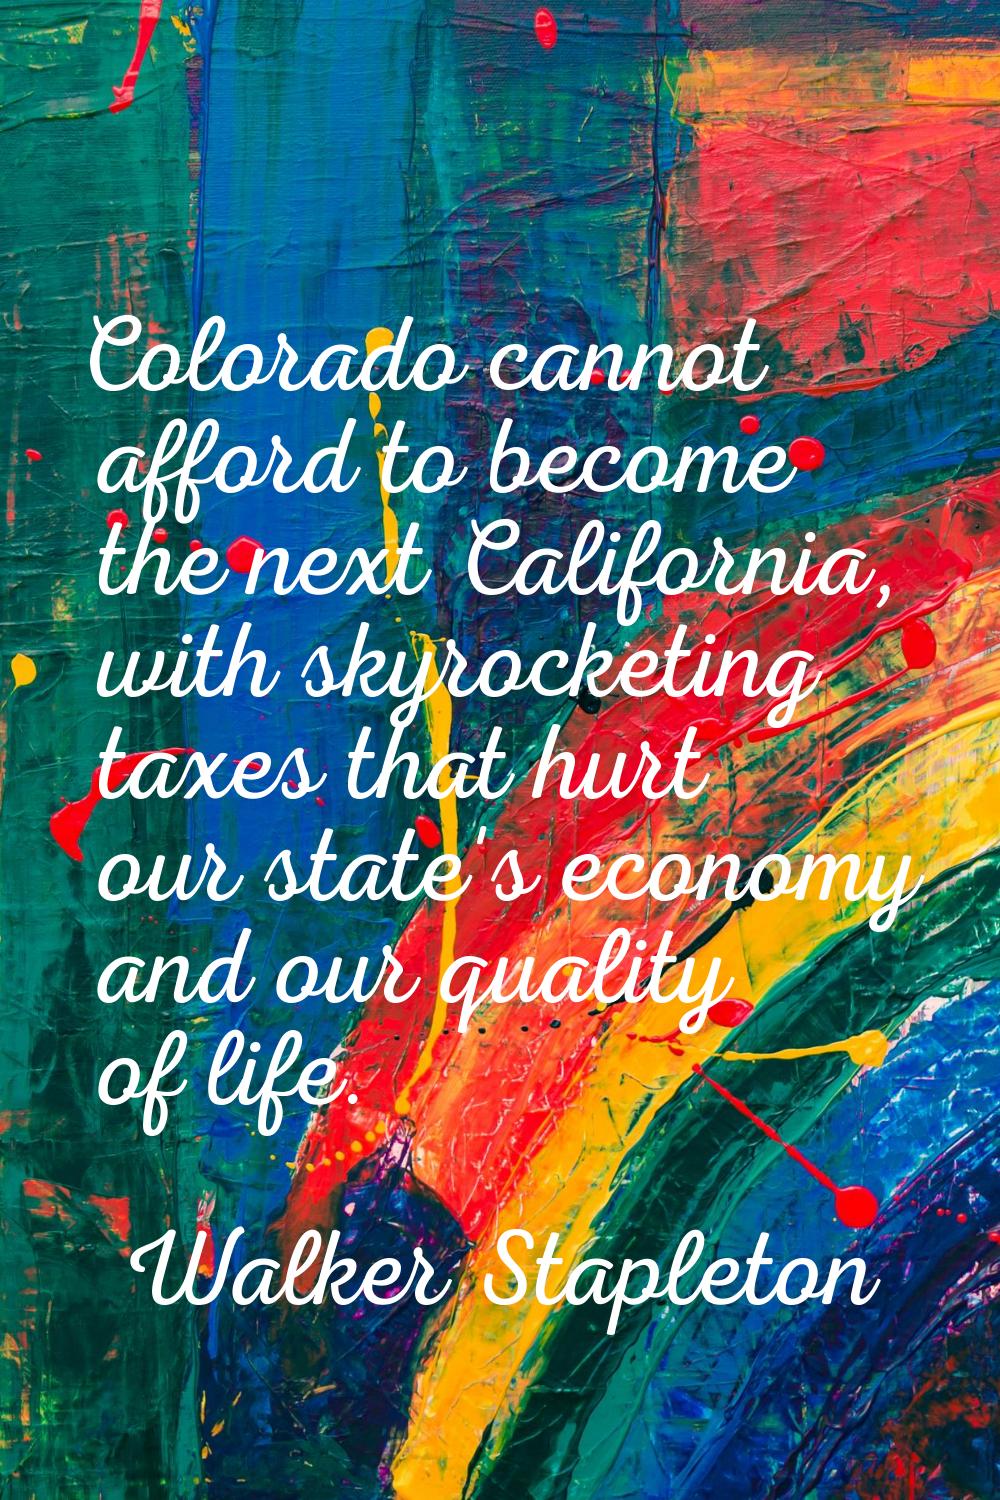 Colorado cannot afford to become the next California, with skyrocketing taxes that hurt our state's